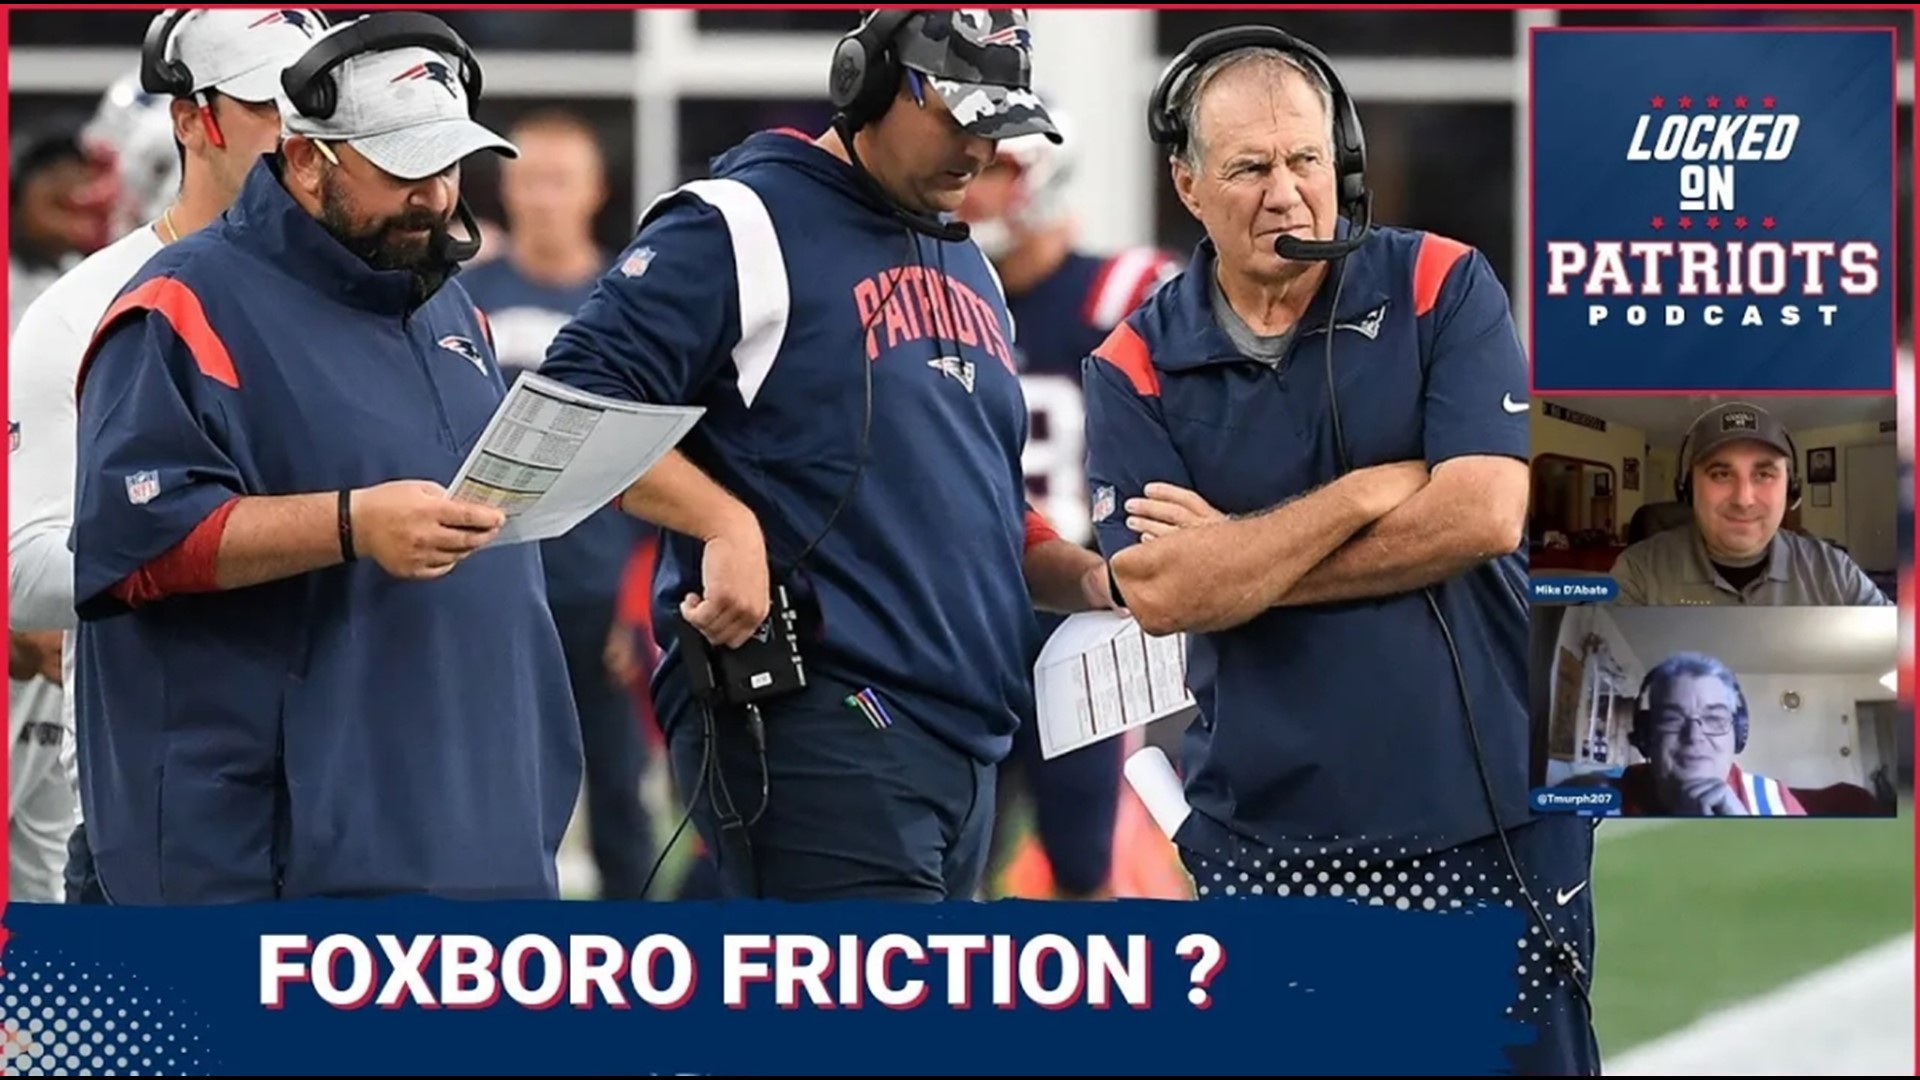 New England Patriots offensive coordinator Bill O’Brien’s first order of business may be to rebuild an offense that lay in ruins after a dismal showing in 2022.